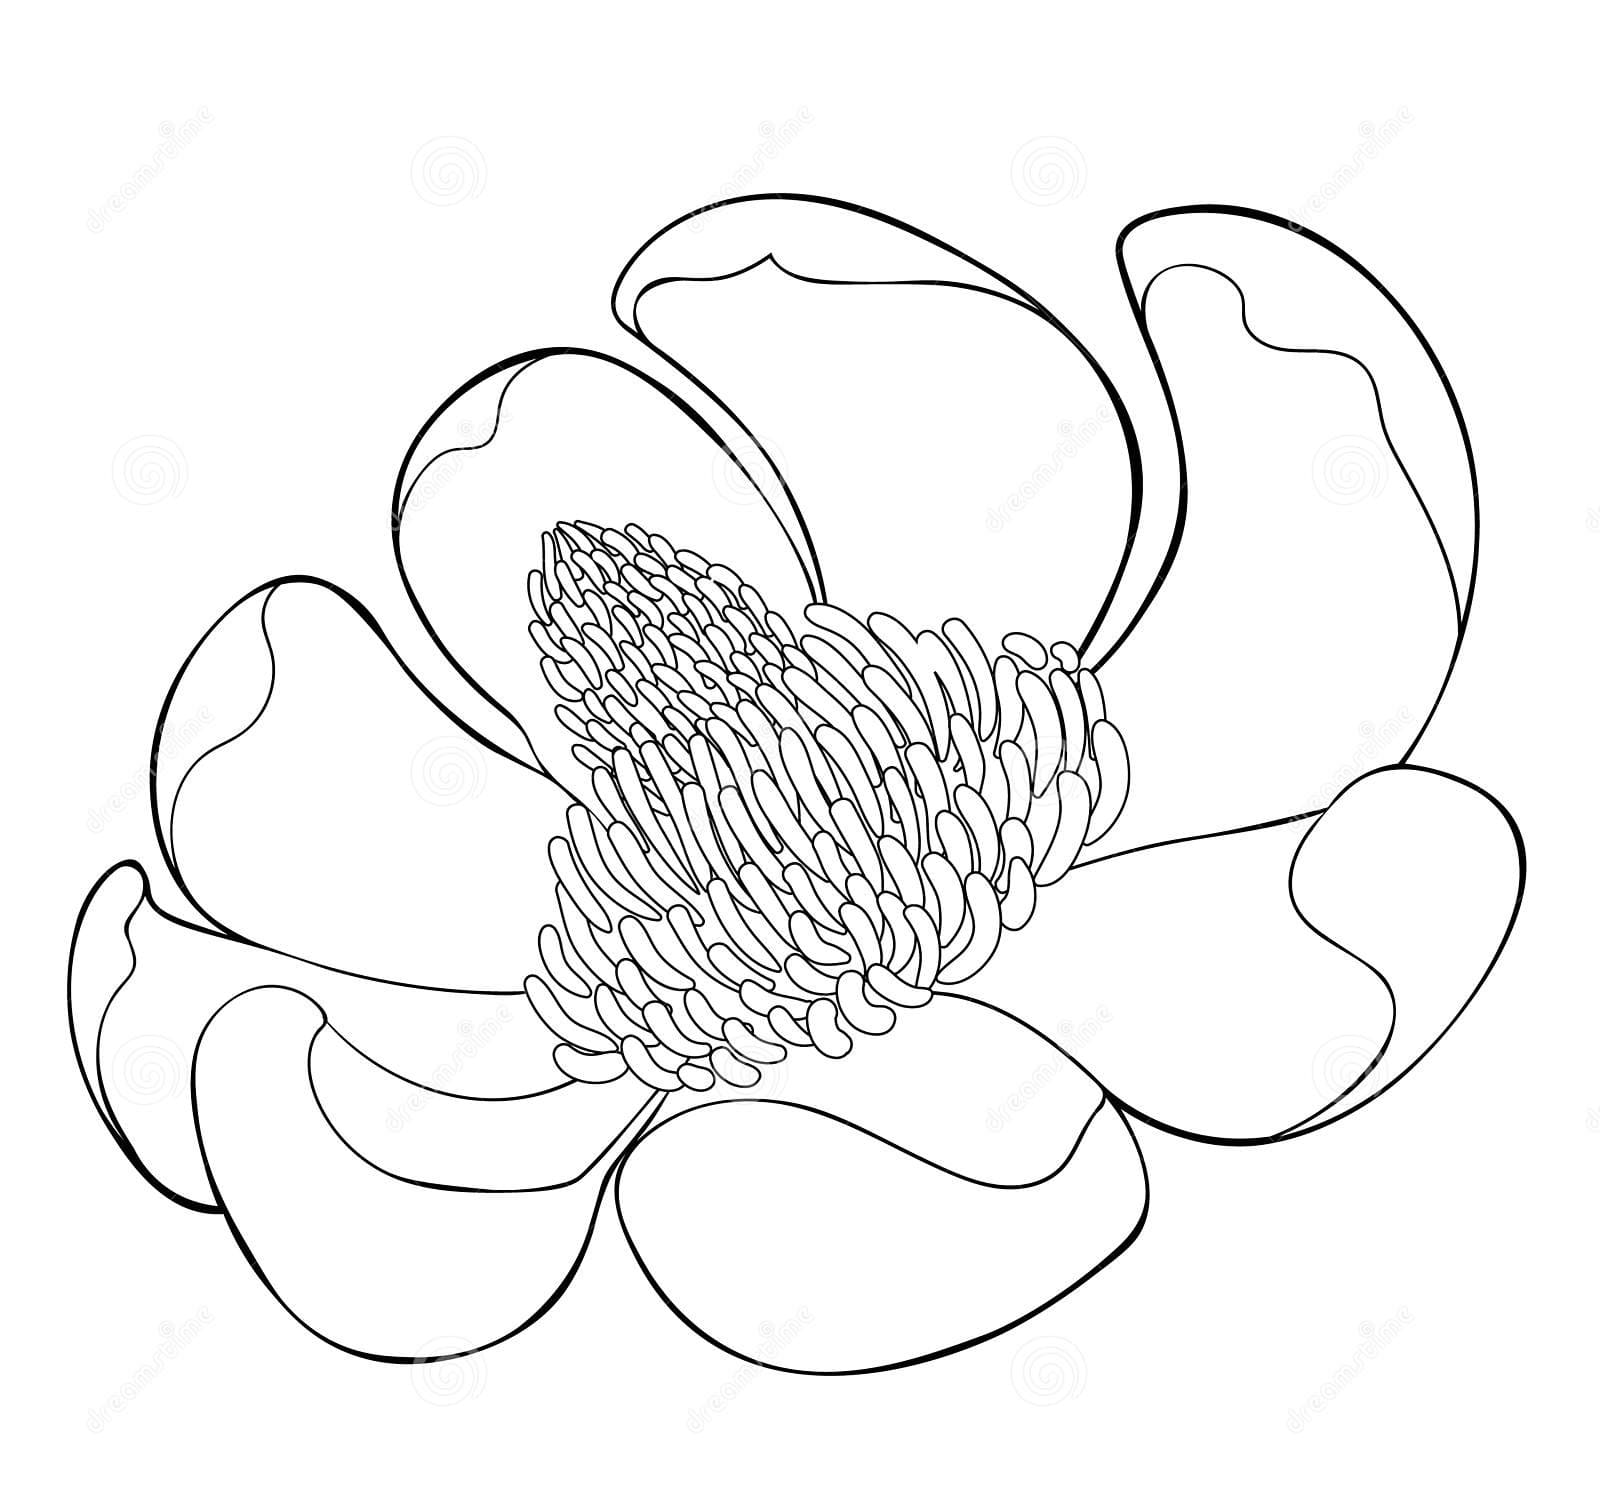 Magnolia Obovate Flower In Bloom Coloring Page